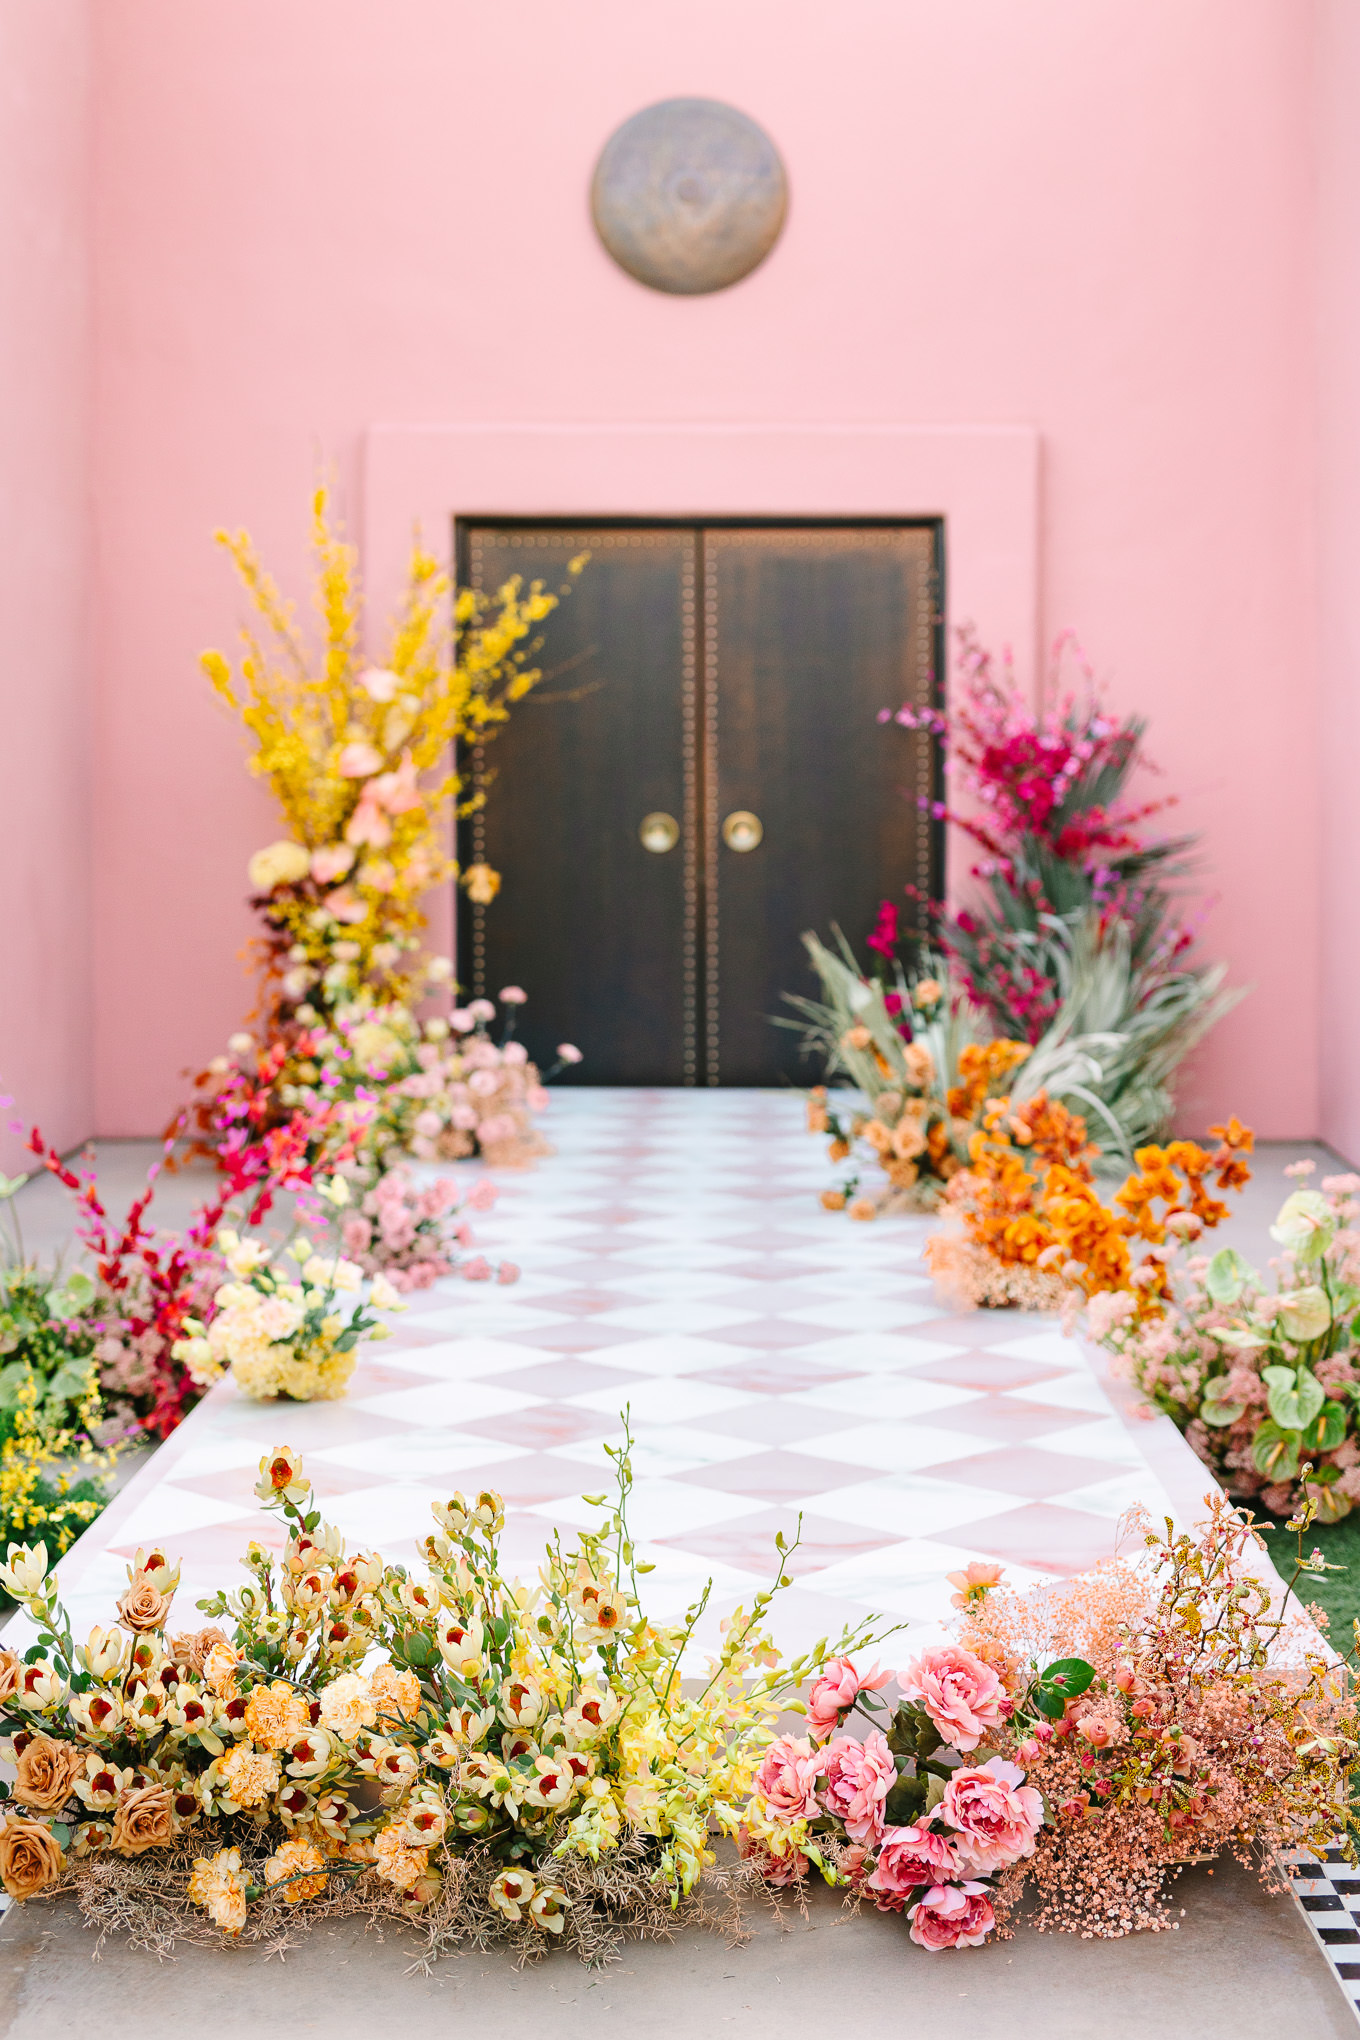 Sands Hotel and Spa Wedding ceremony with pink checker runway and colorful flowers | Kindred Presets x Mary Costa Photography Sands Hotel Ad Campaign | Colorful Palm Springs wedding photography | #palmspringsphotographer #lightroompresets #sandshotel #pinkhotel   Source: Mary Costa Photography | Los Angeles